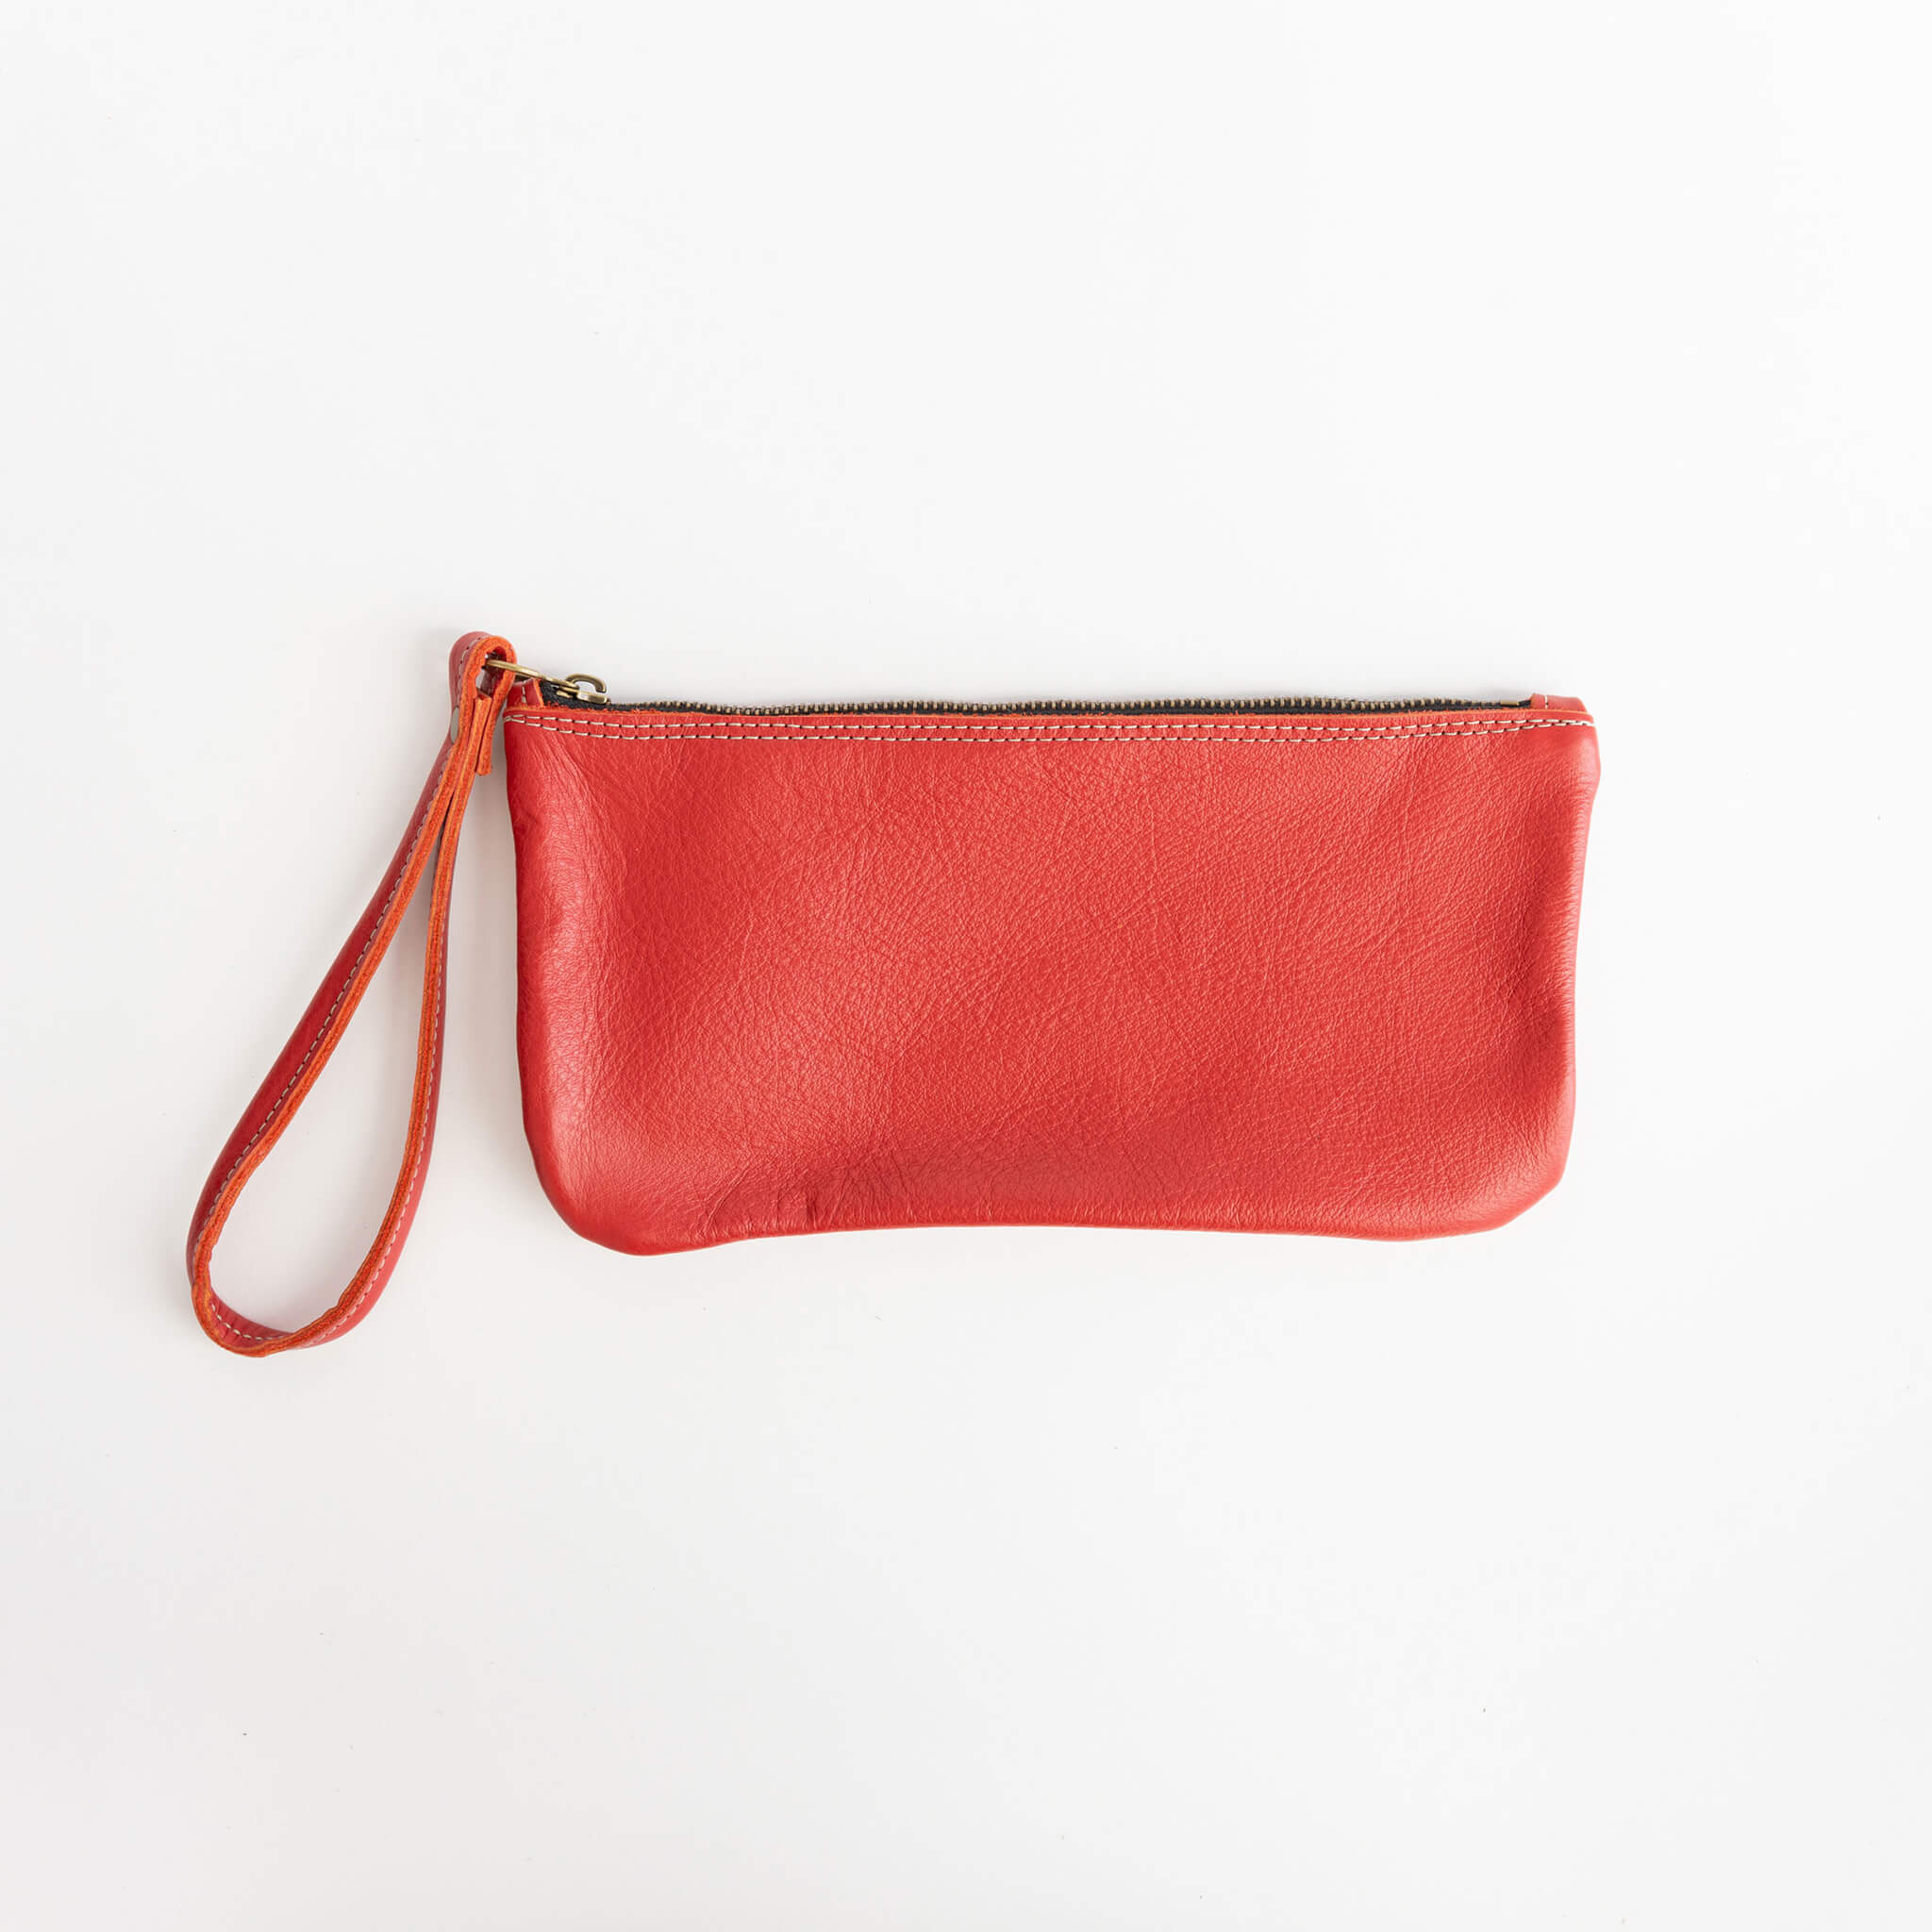 francis clutch - wristlet - handmade leather - poppy front view